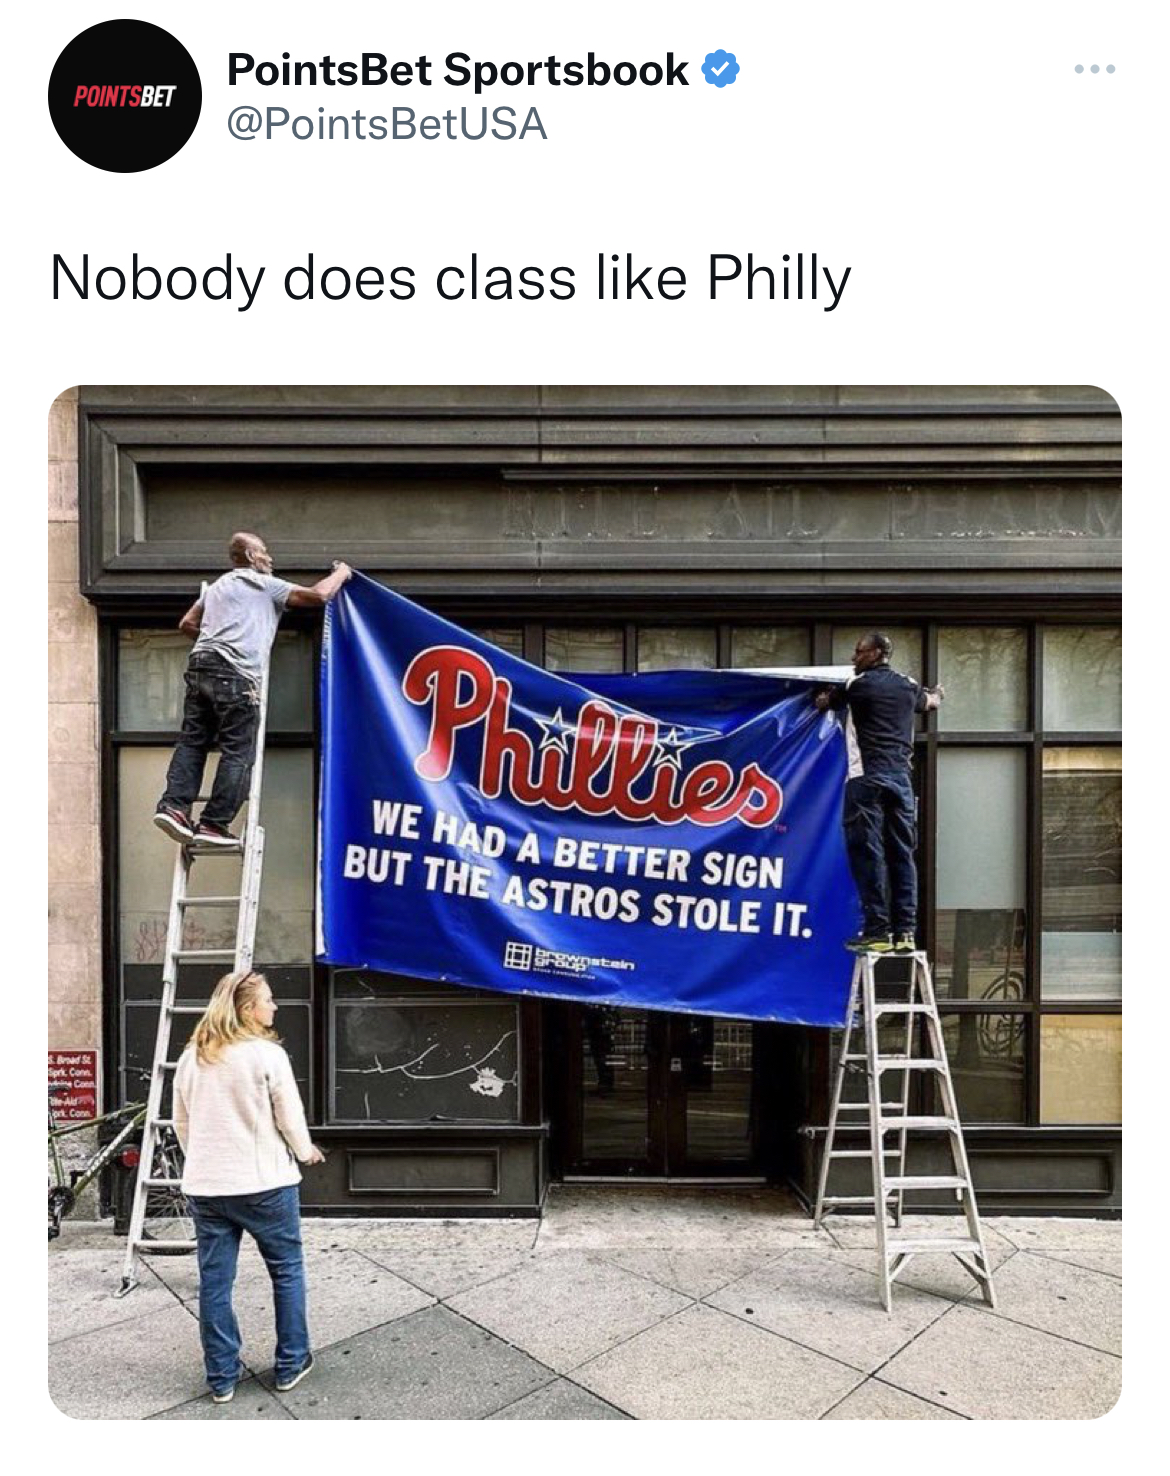 tweets roasting celebs - banner - Pointsbet PointsBet Sportsbook Nobody does class Philly Phillies We Had A Better Sign But The Astros Stole It.